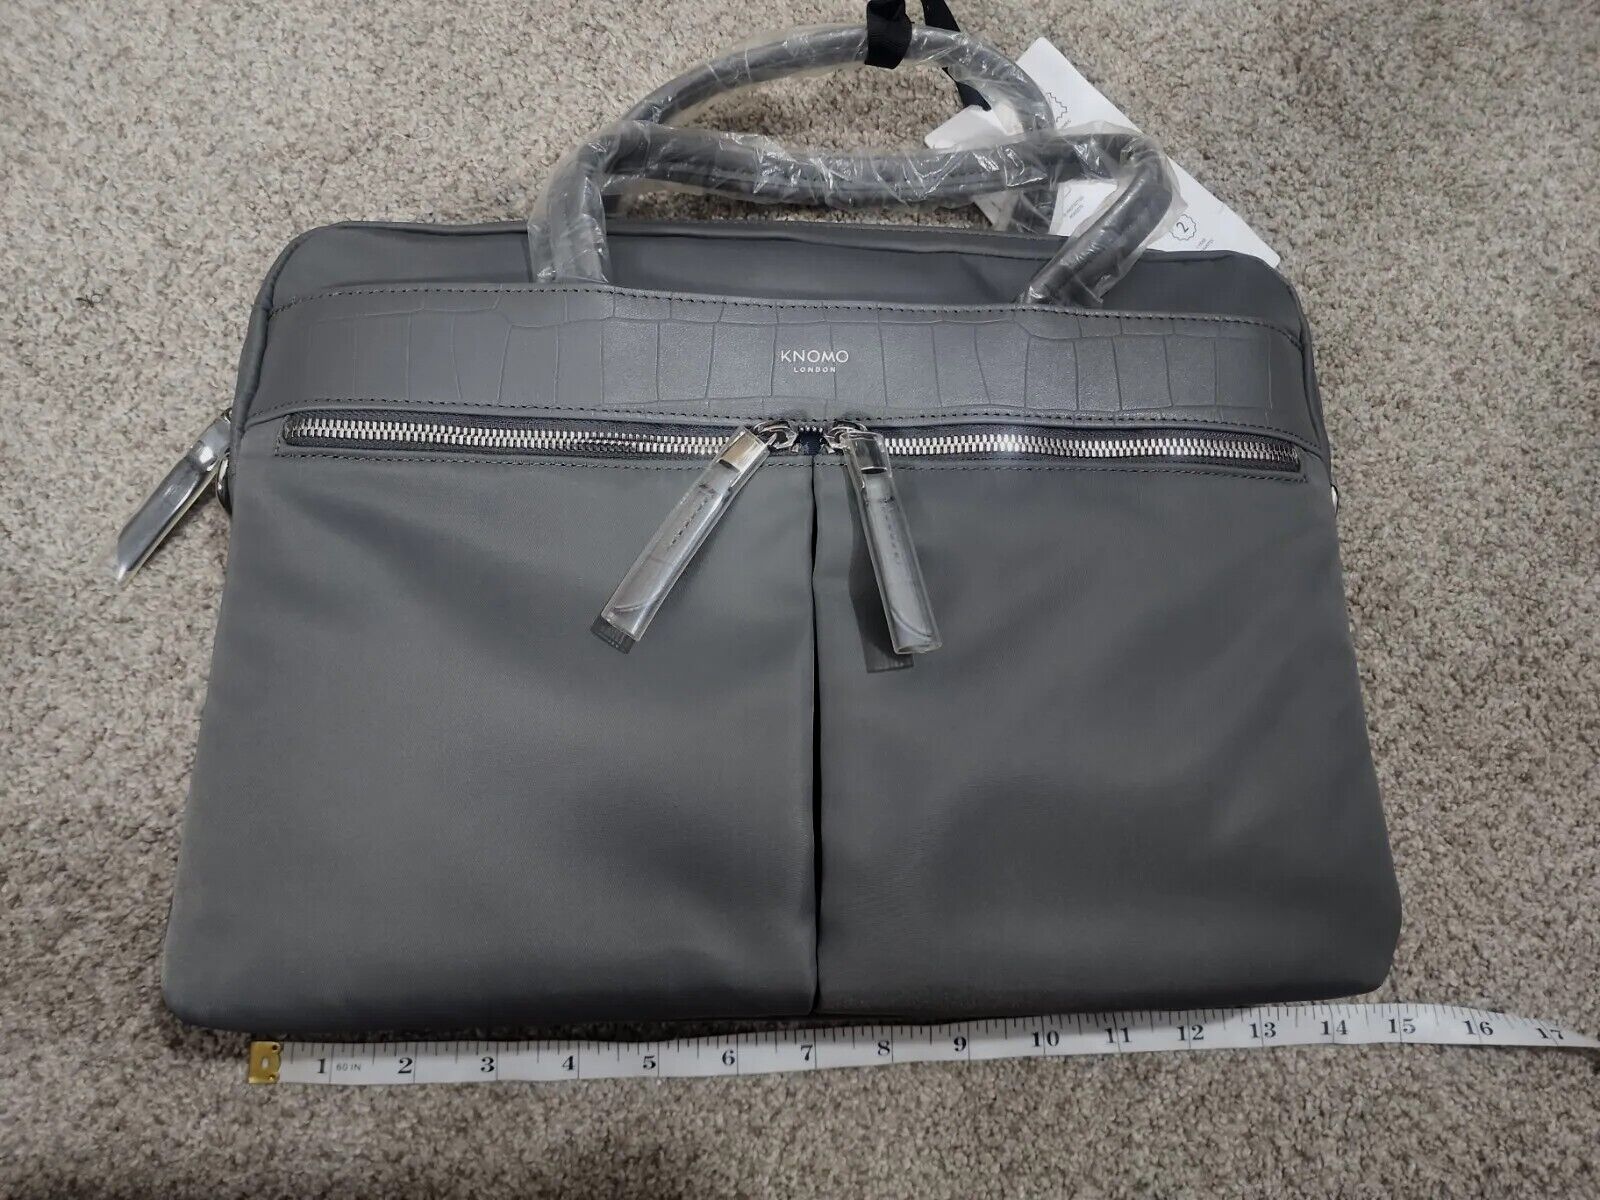 NEW WITH TAGS - BEAUTIFUL KNOMO HANOVER LEATHER BAG